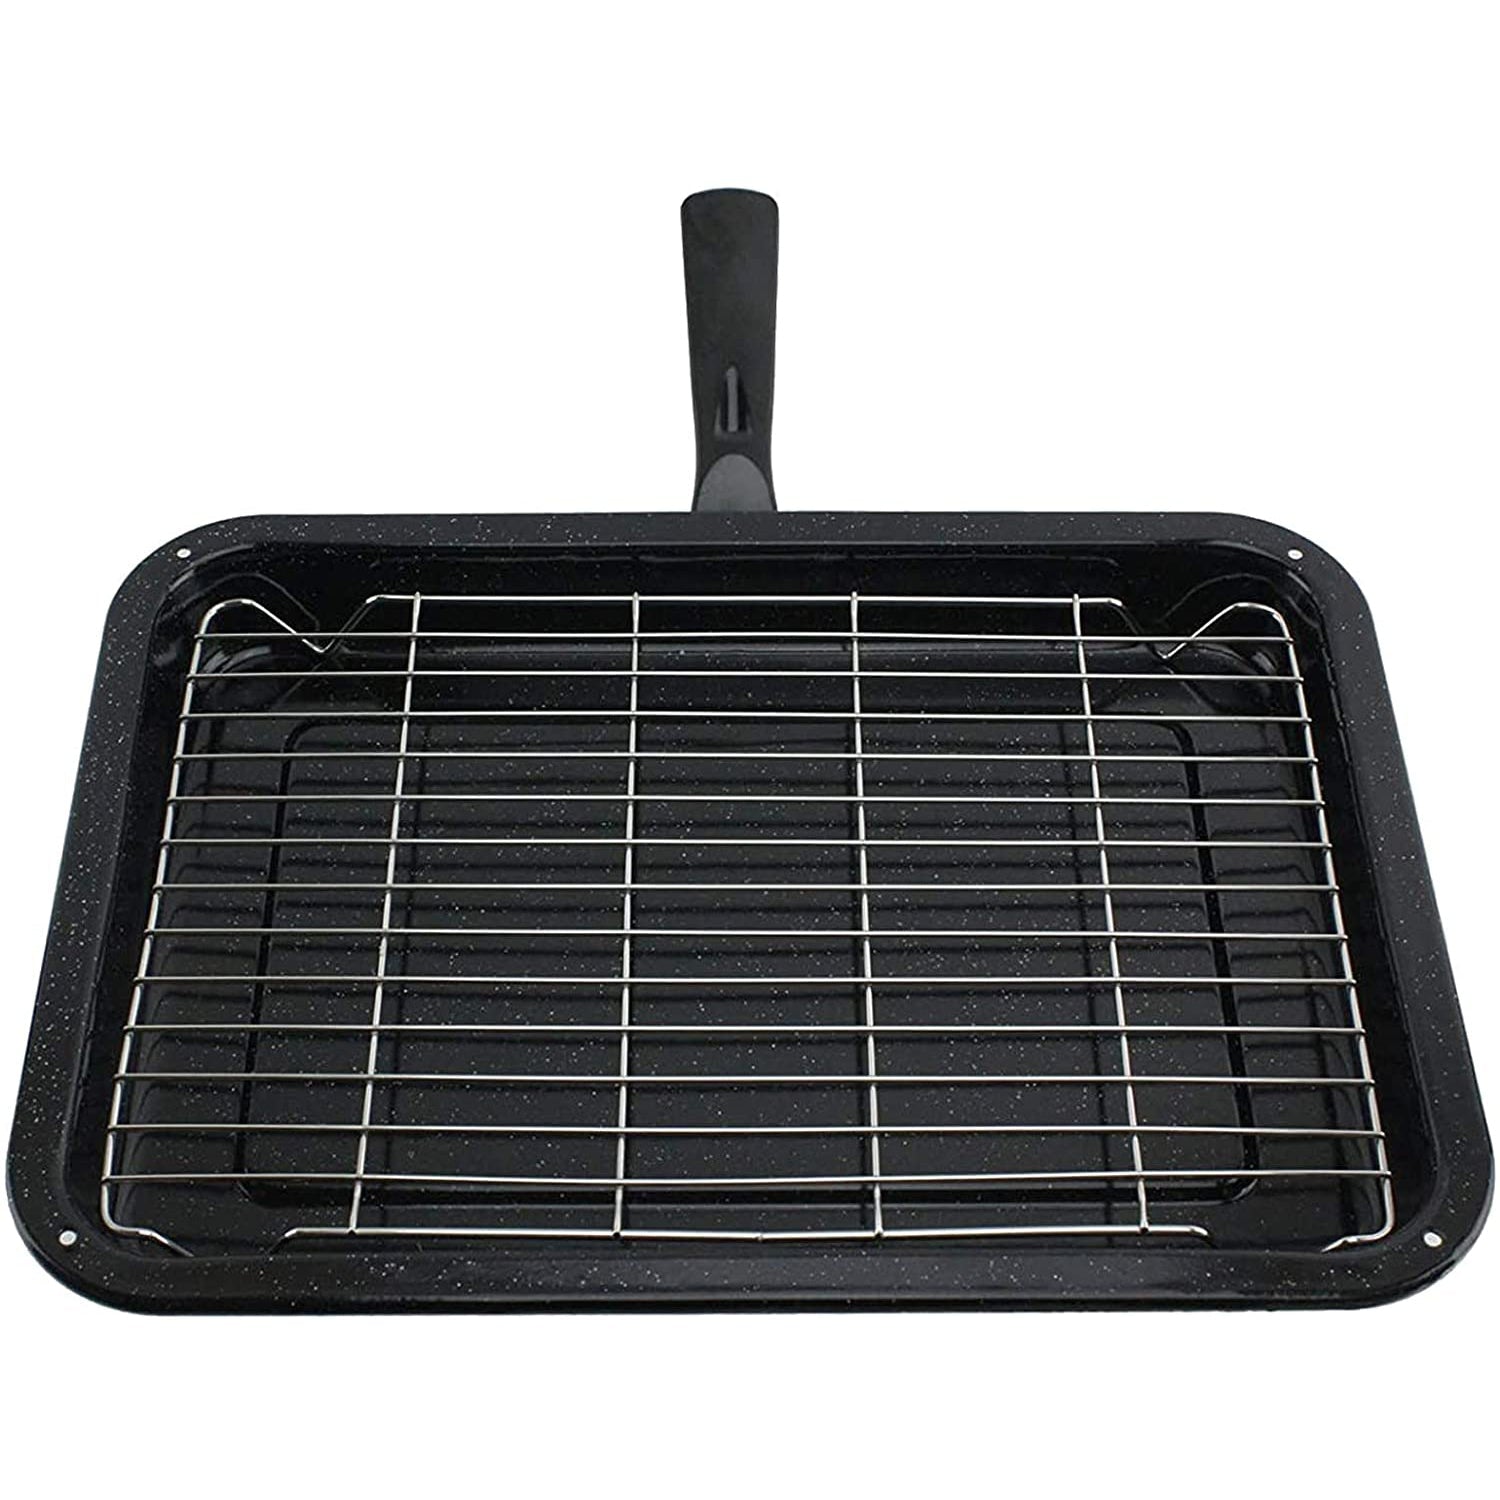 Small Grill Pan + Rack and Detachable Handle for ELECTROLUX Oven Cooker